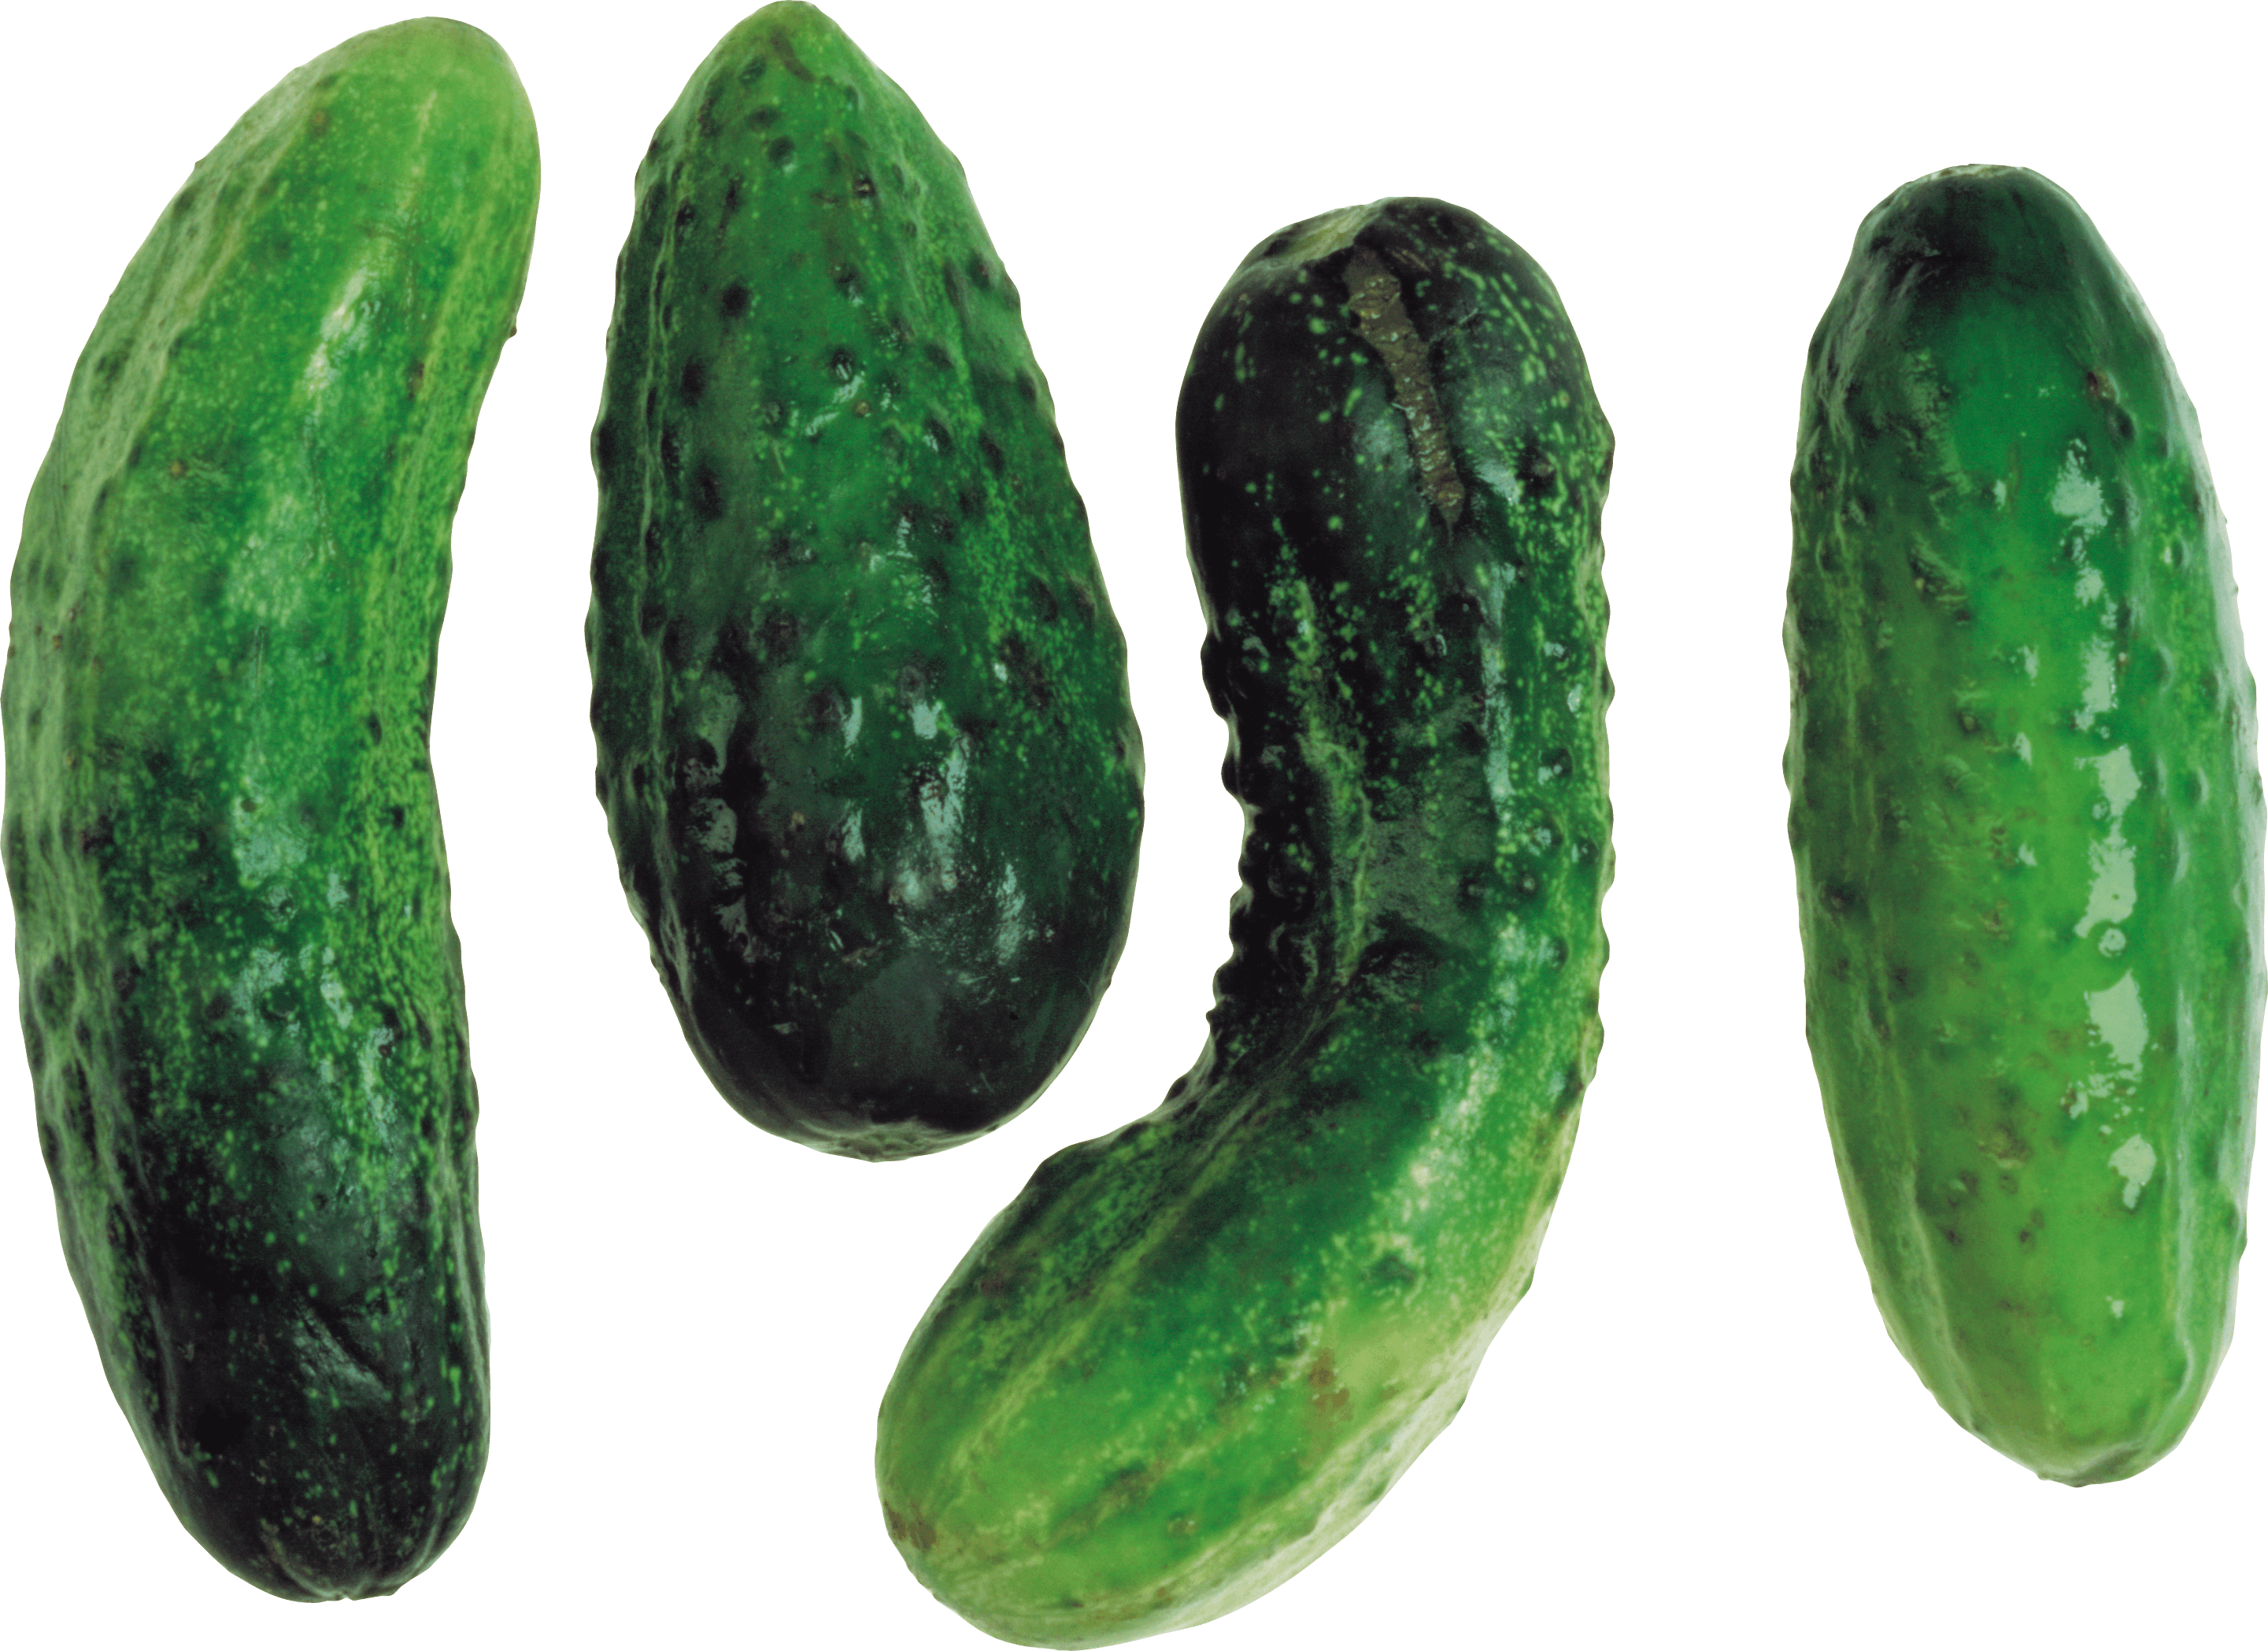 Cucumbers Png Image PNG Image